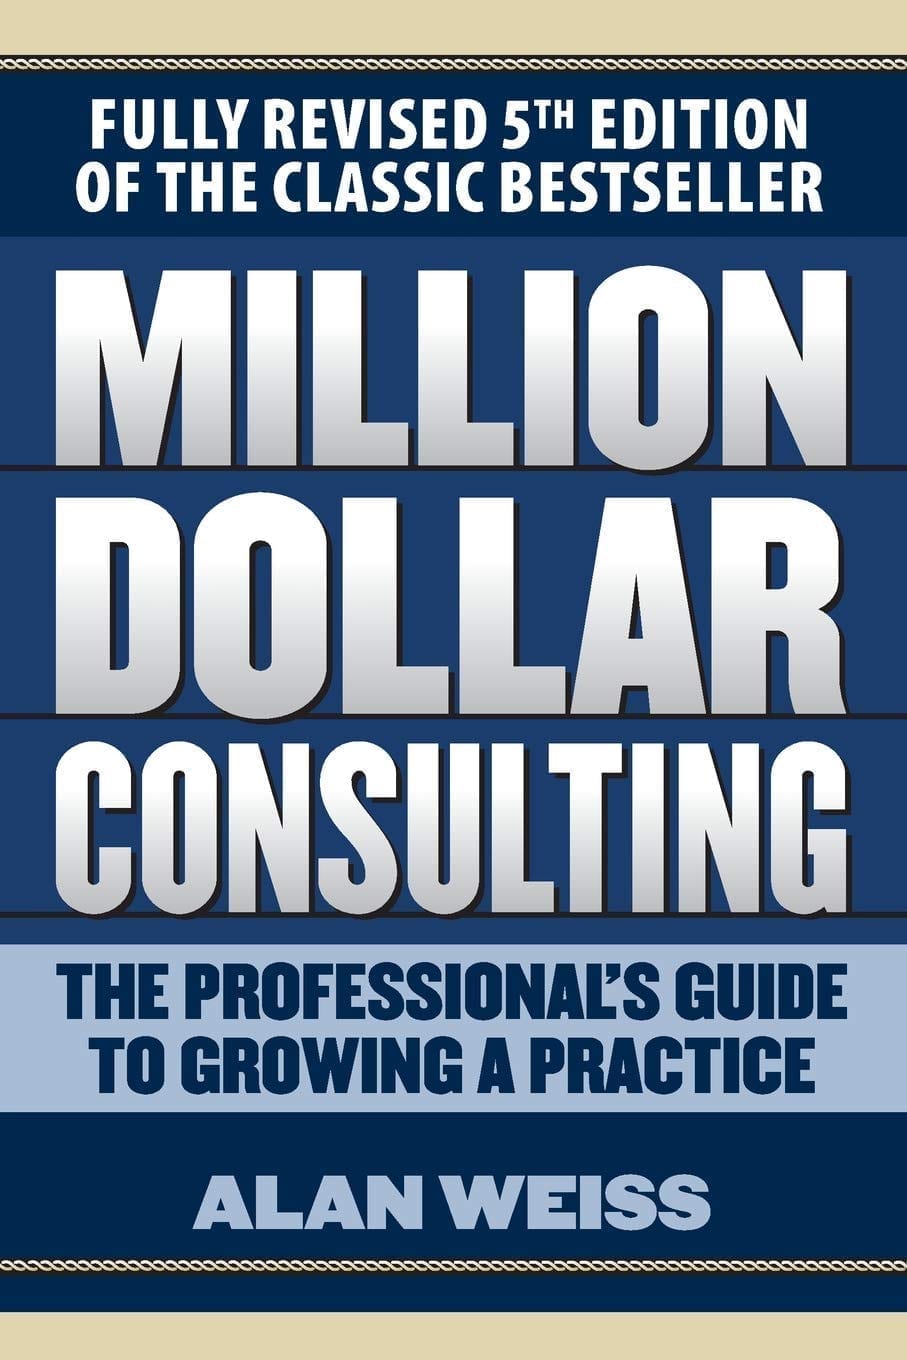 Million Dollar Consulting by Alan Weiss